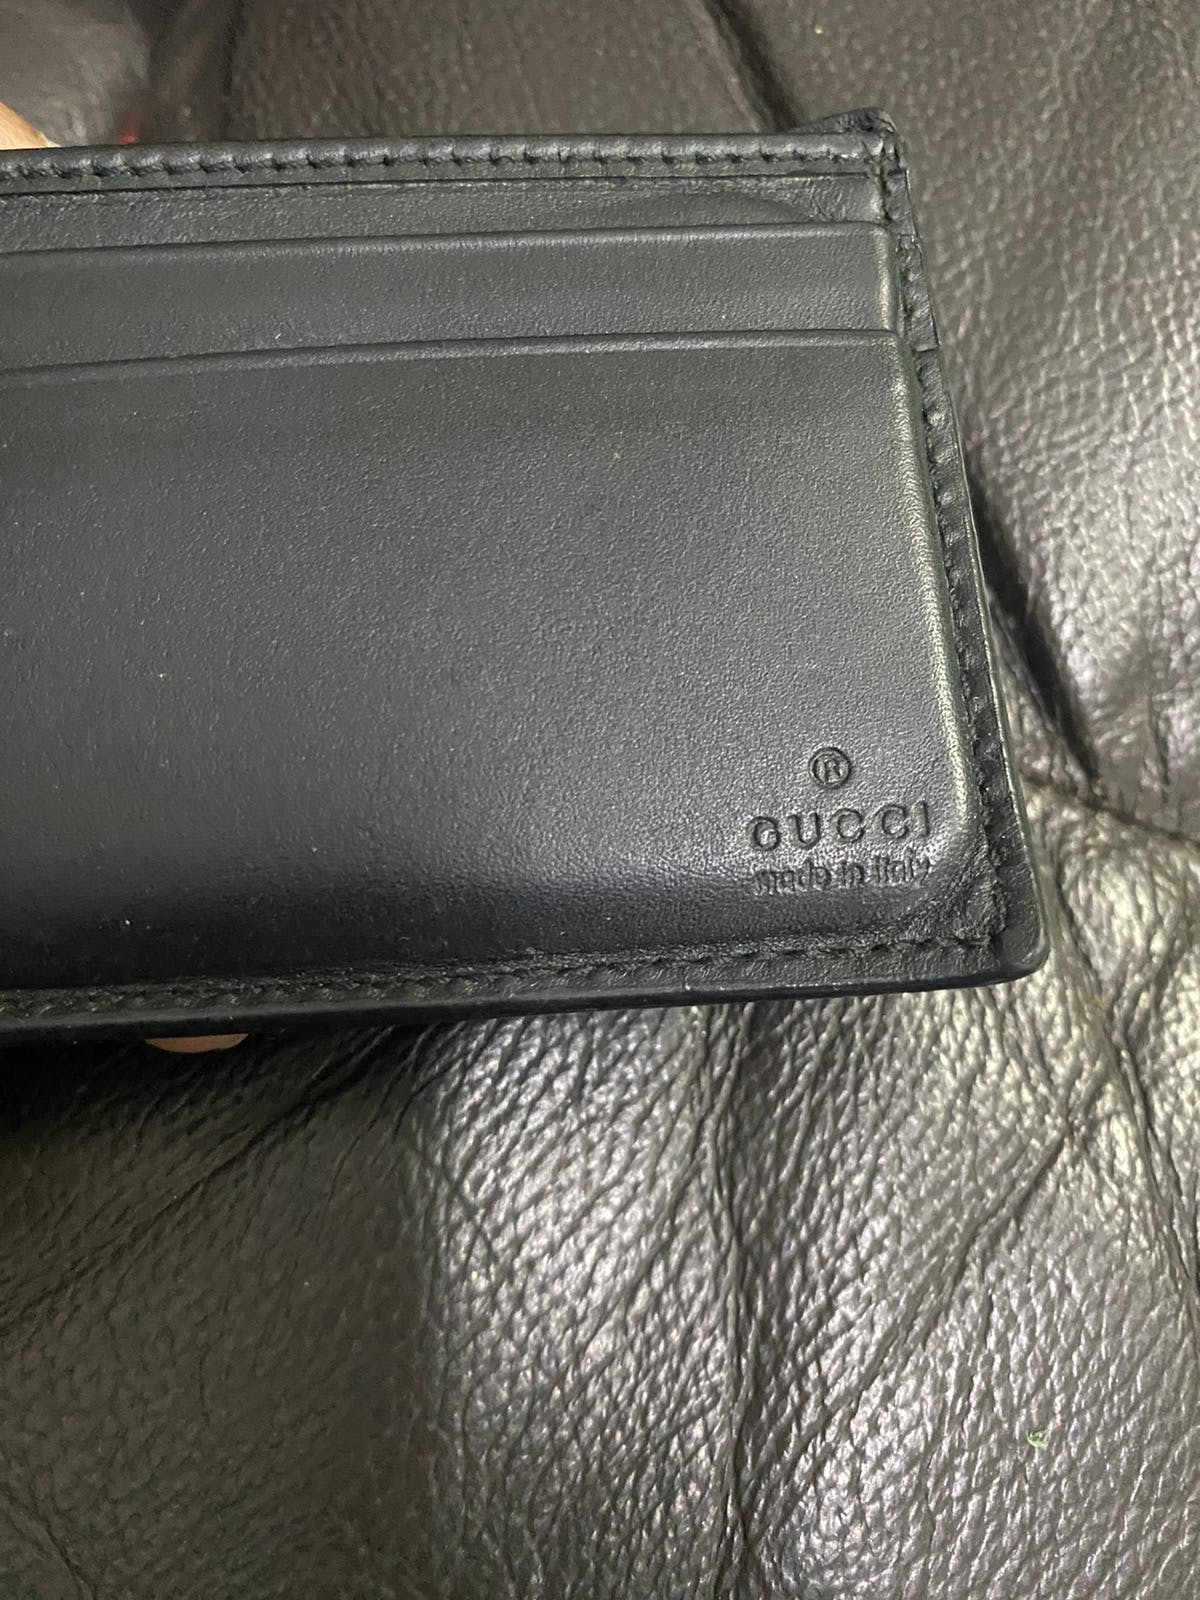 Authentic Gucci Snake Wallet - 4